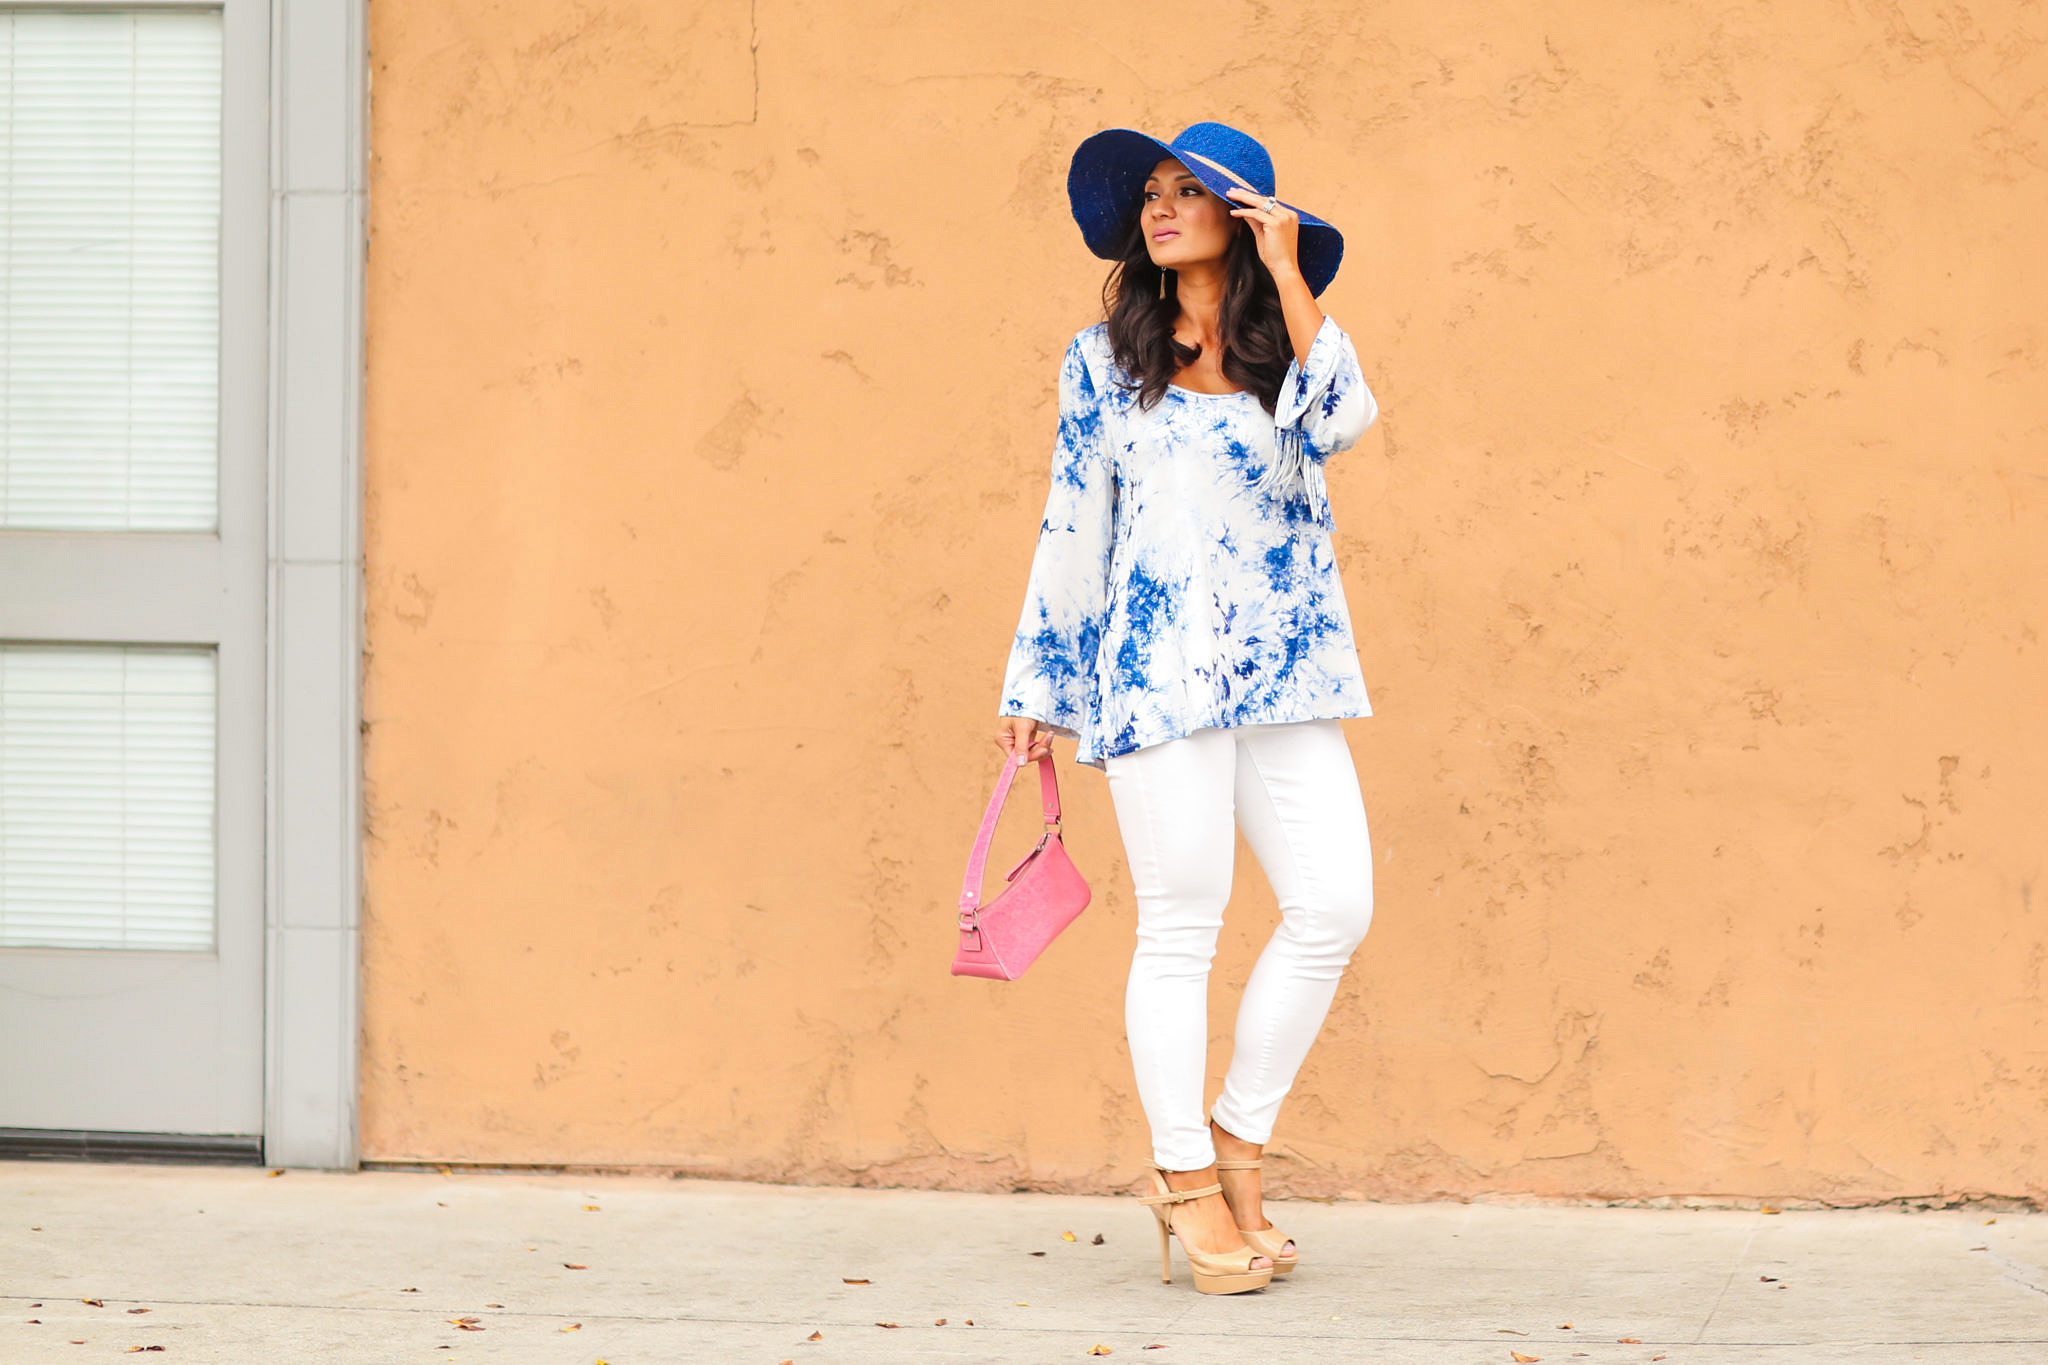 A Shade of Pink, White & Blue | Hats Off To You!